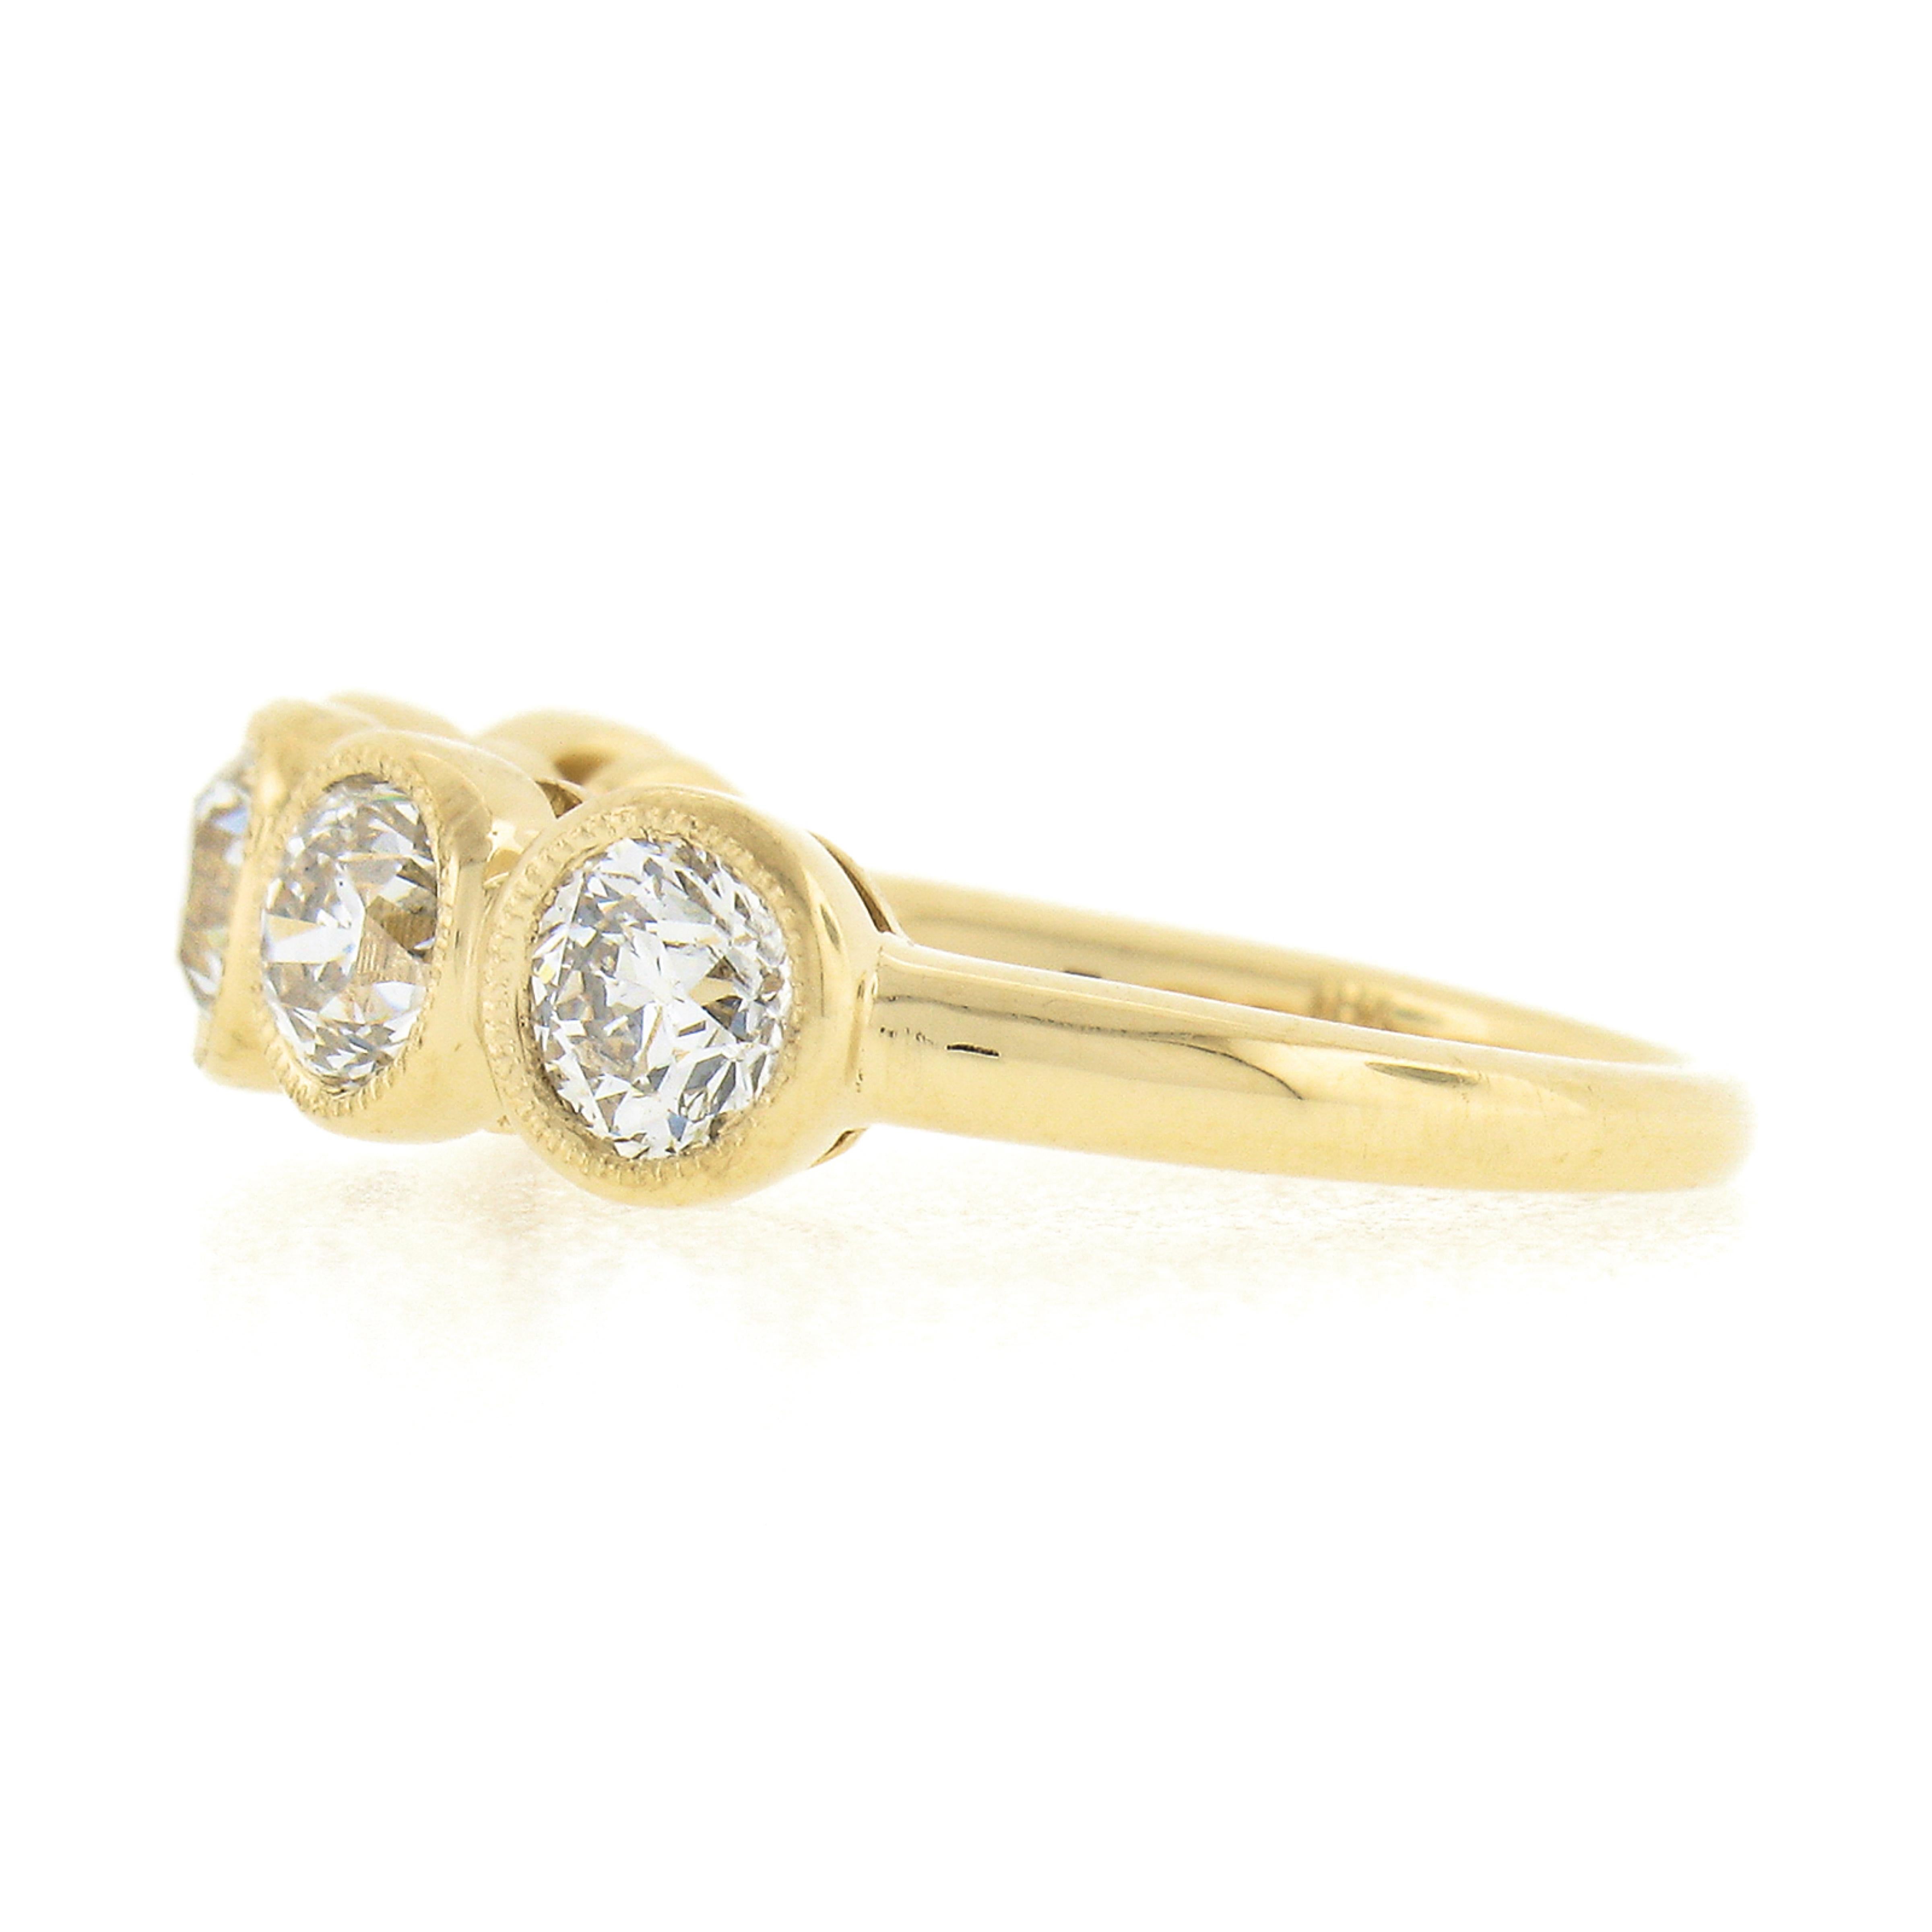 This magnificent diamond band ring was newly crafted from solid 18k yellow gold and features 5 old European cut diamonds neatly bezel set with delicate milgrain etching across its top. Each of these fiery diamond shows a very nice large size,